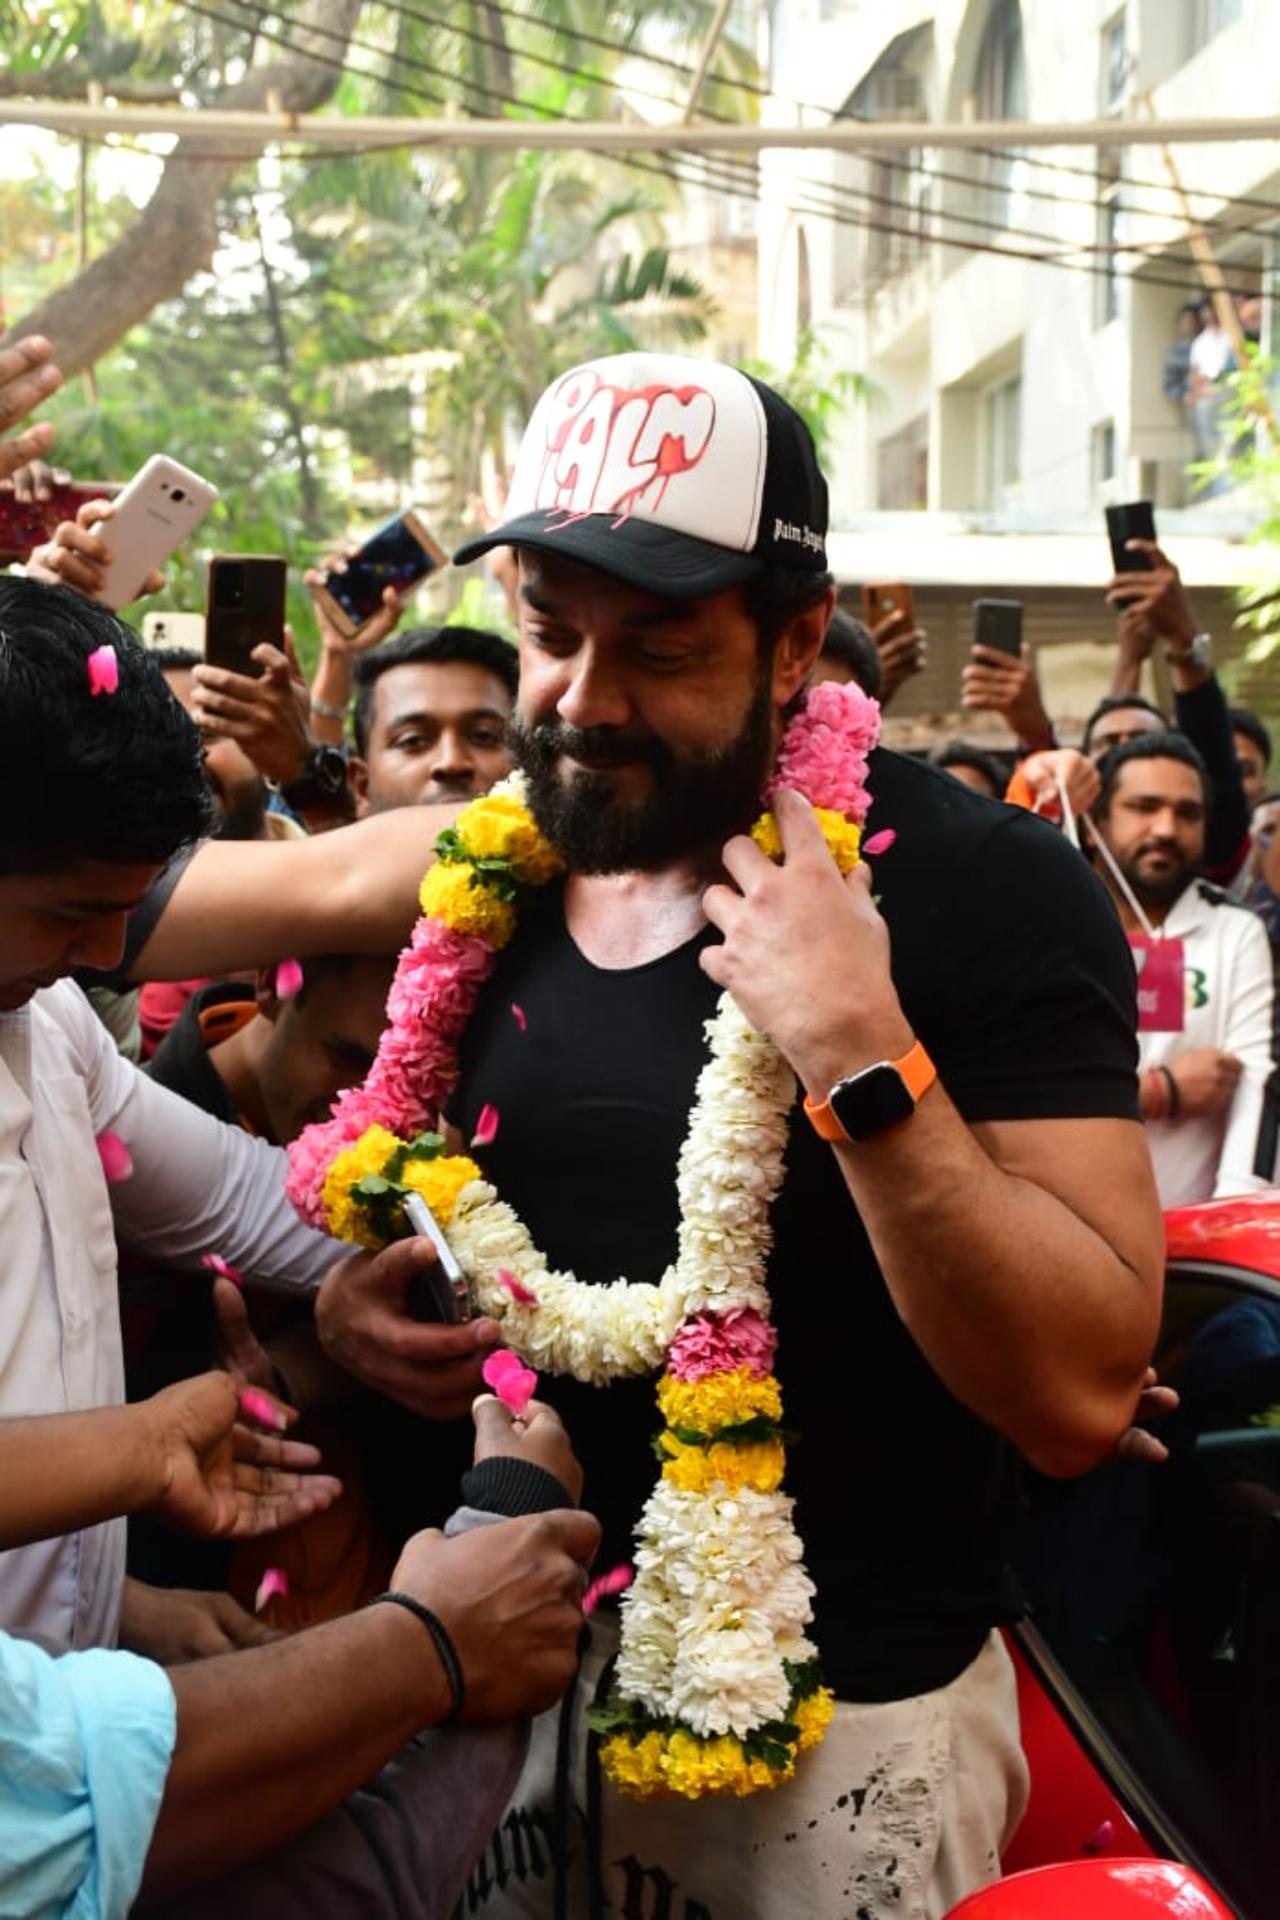 Bobby Deol has been a part of the film industry for over 25 years now. The actor who turned 54 today stepped out of his house to celebrate his day with fans who gathered outside his house